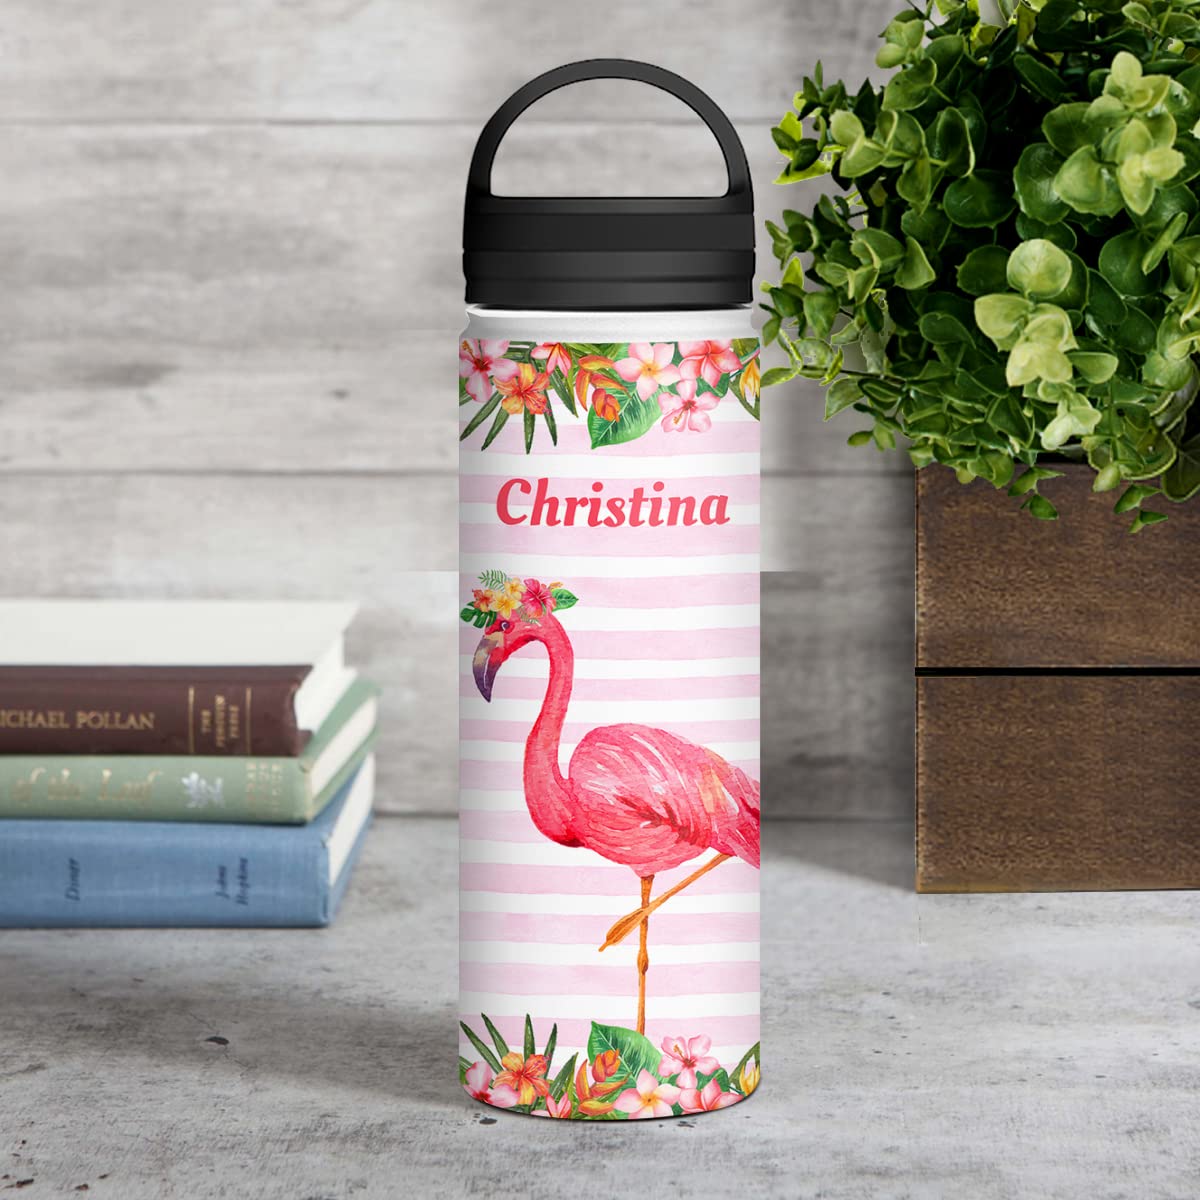 winorax Personalized Famingo Water Bottle Life Is Better With Flamingo Bottles Reminder For Women Girls Teen 12oz 18oz 32oz Stainless Steel Inspirational Gifts For Birthday Back To School Christmas